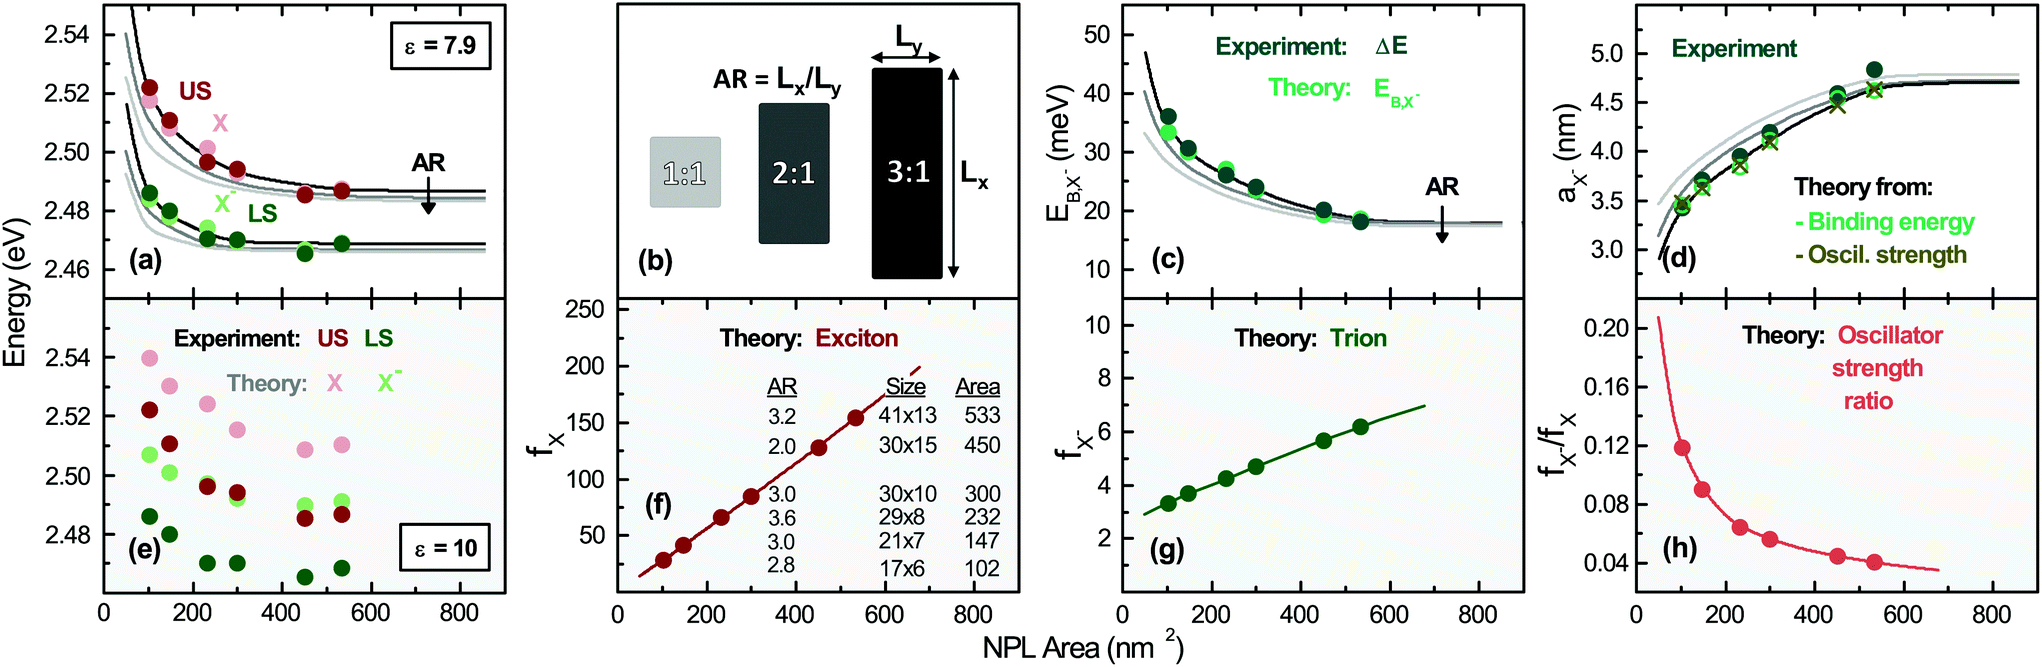 Tuning Trion Binding Energy And Oscillator Strength In A Laterally Finite 2d System Cdse Nanoplatelets As A Model System For Trion Properties Nanoscale Rsc Publishing Doi 10 1039 D0nrd